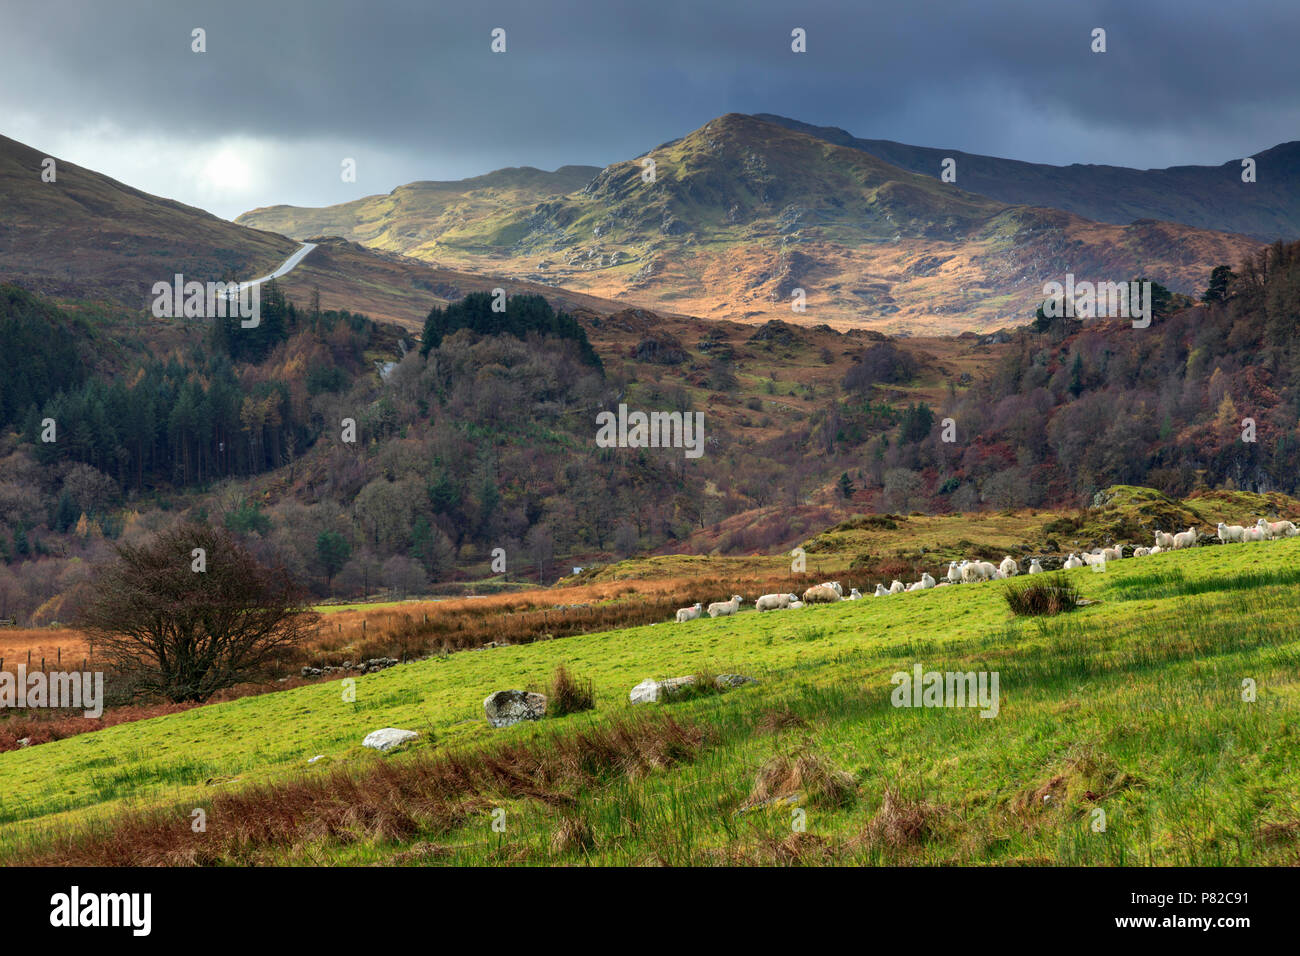 The Dolwyddelan Valley in the Snowdonia National Park. Stock Photo